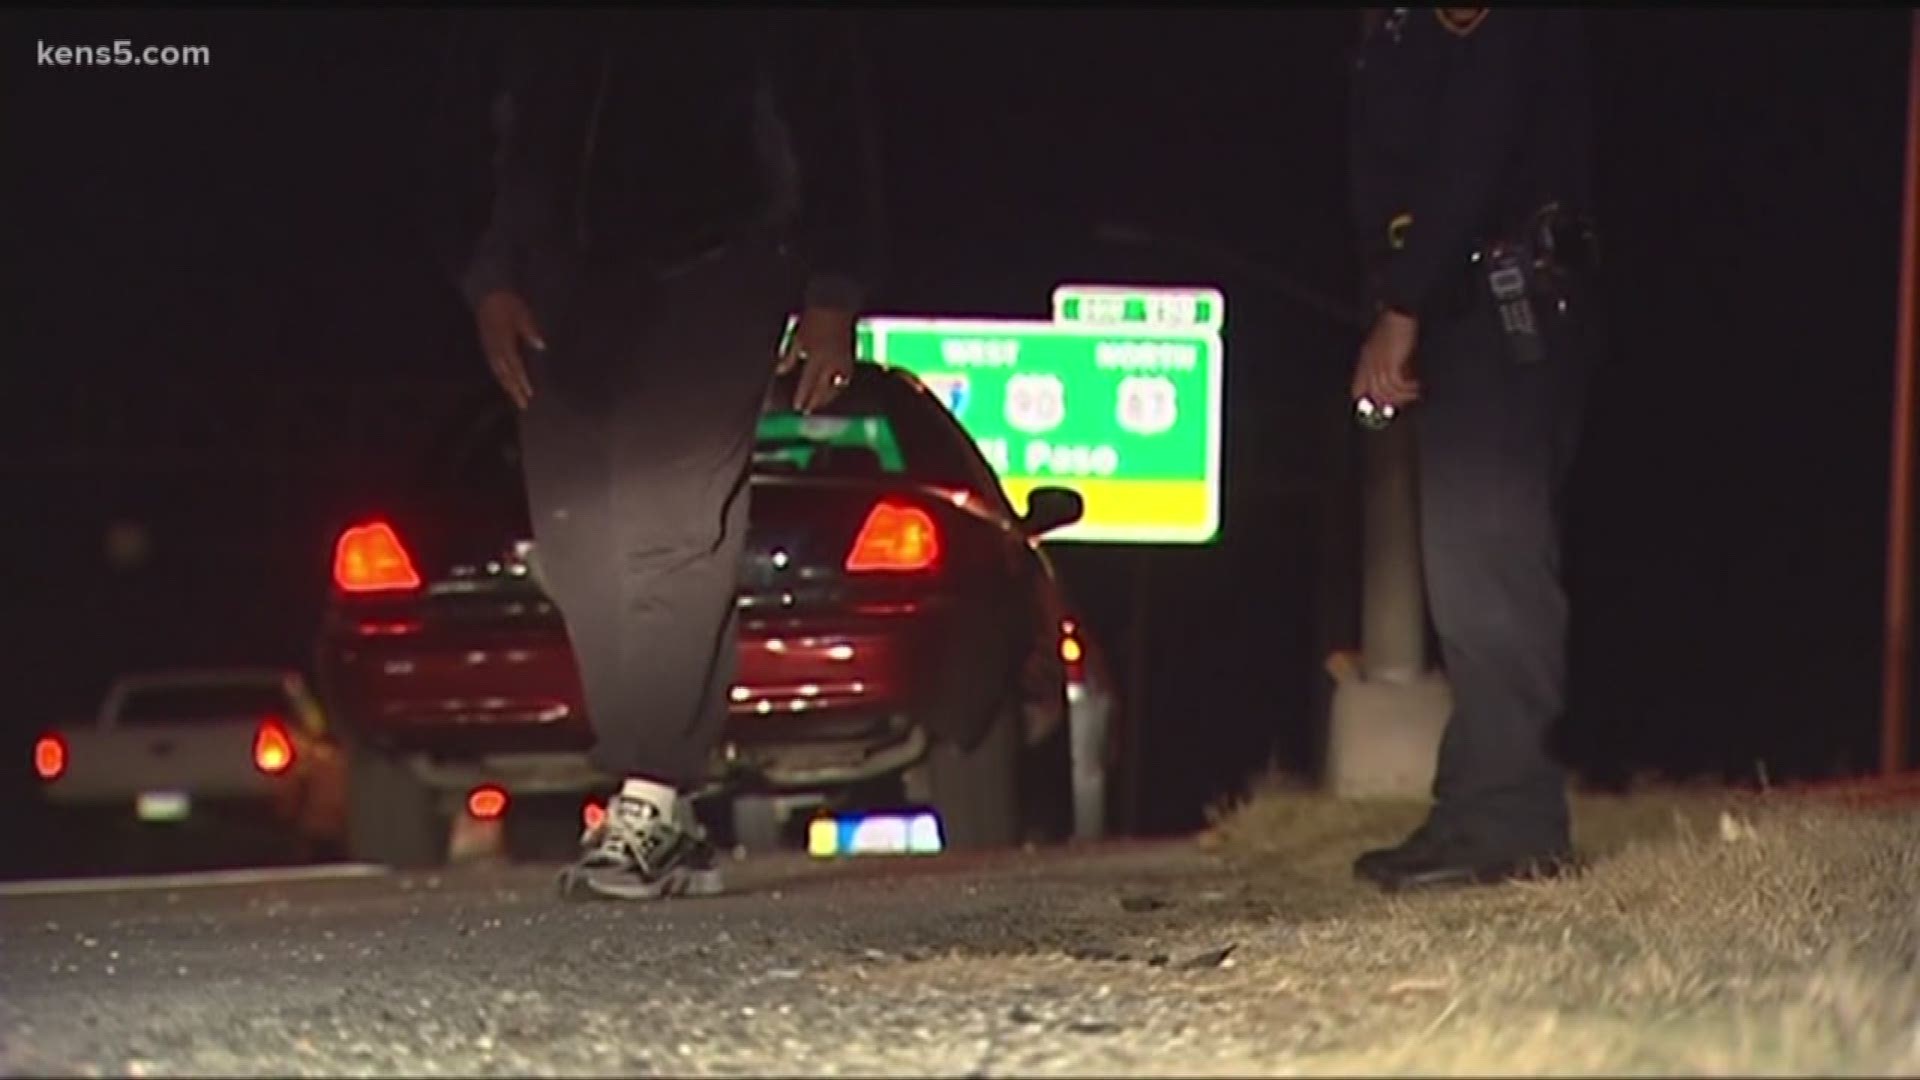 By nearly 20 percent, to be exact. And DWI crash-related injuries shoot up by 41 percent.